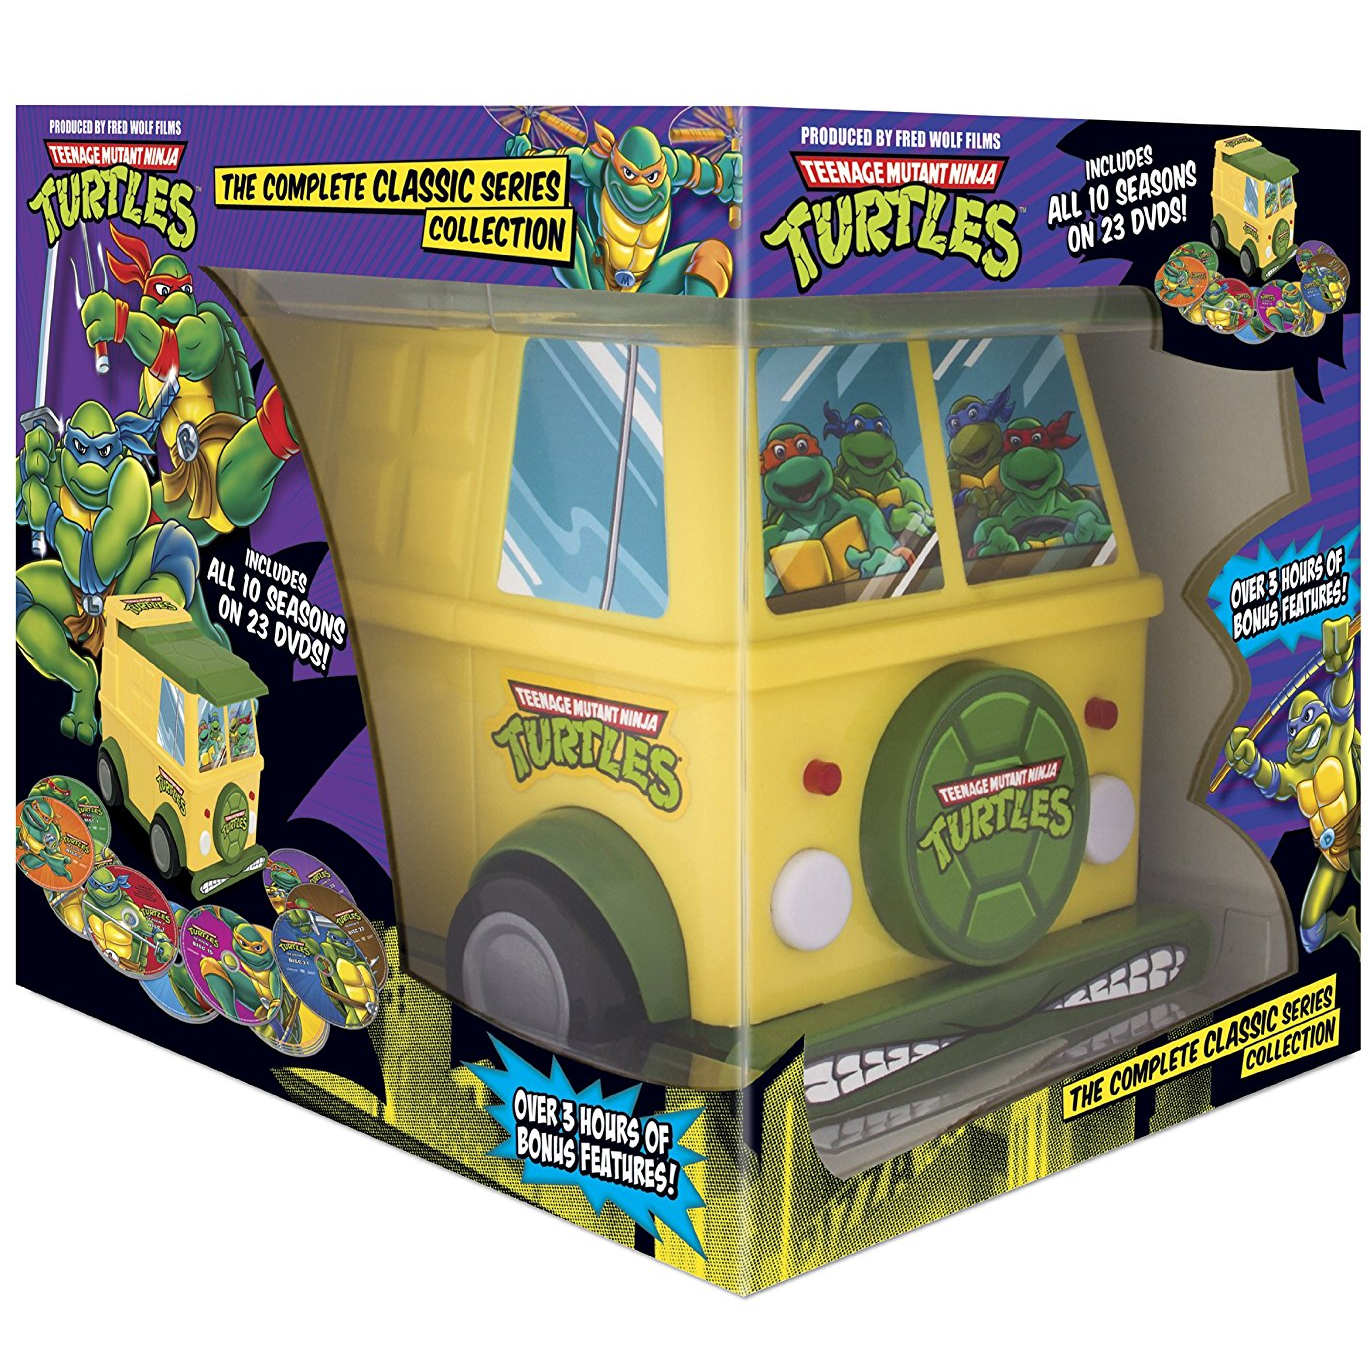 eenage Mutant Ninja Turtles: The Complete Classic Series Collection Only $49.99!